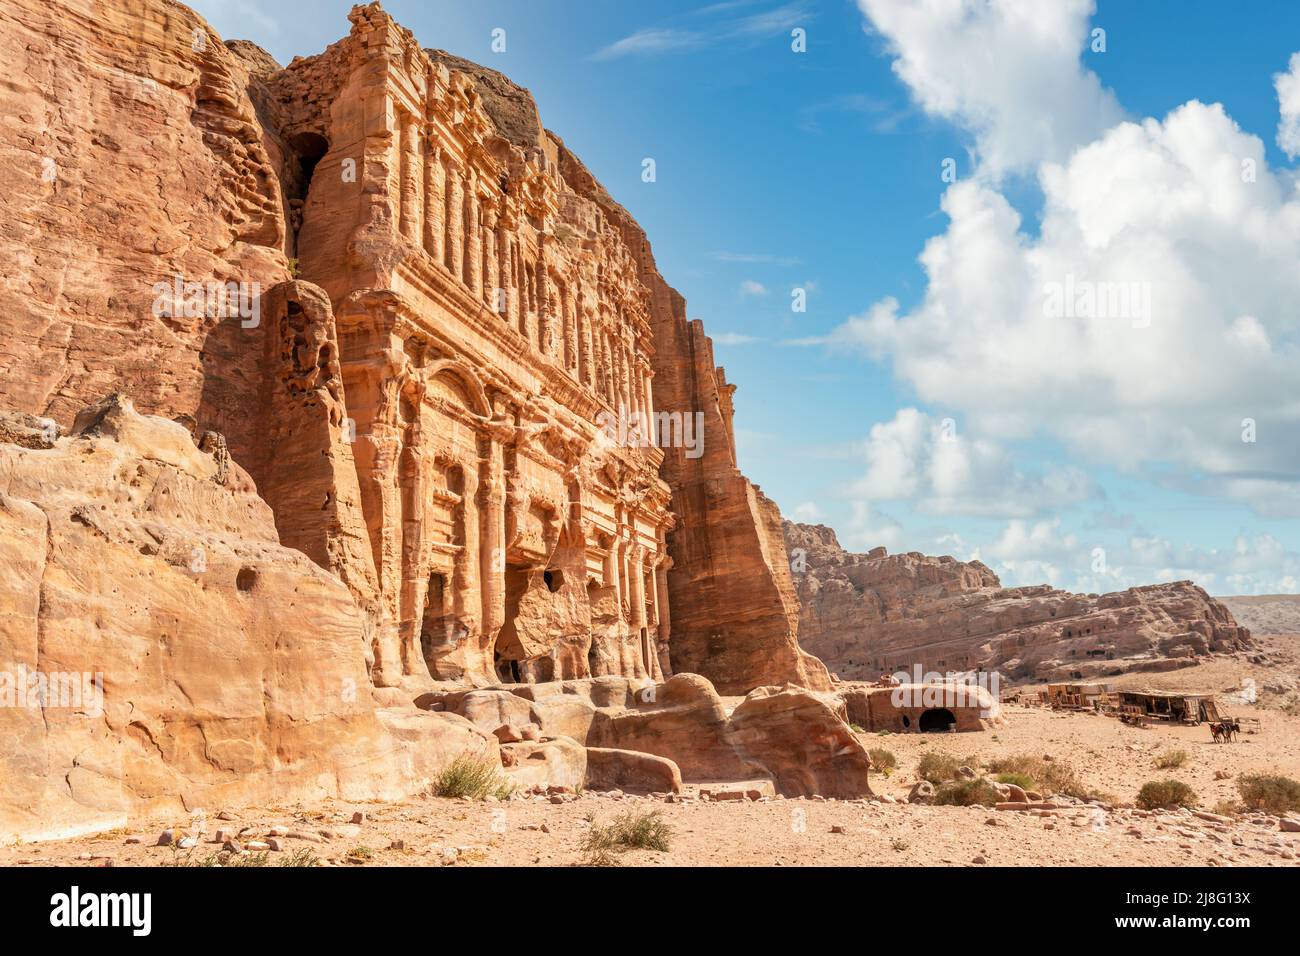 Ancient Nabataean Palace tomb carved in sandstone rock, Petra, Jordan Stock Photo